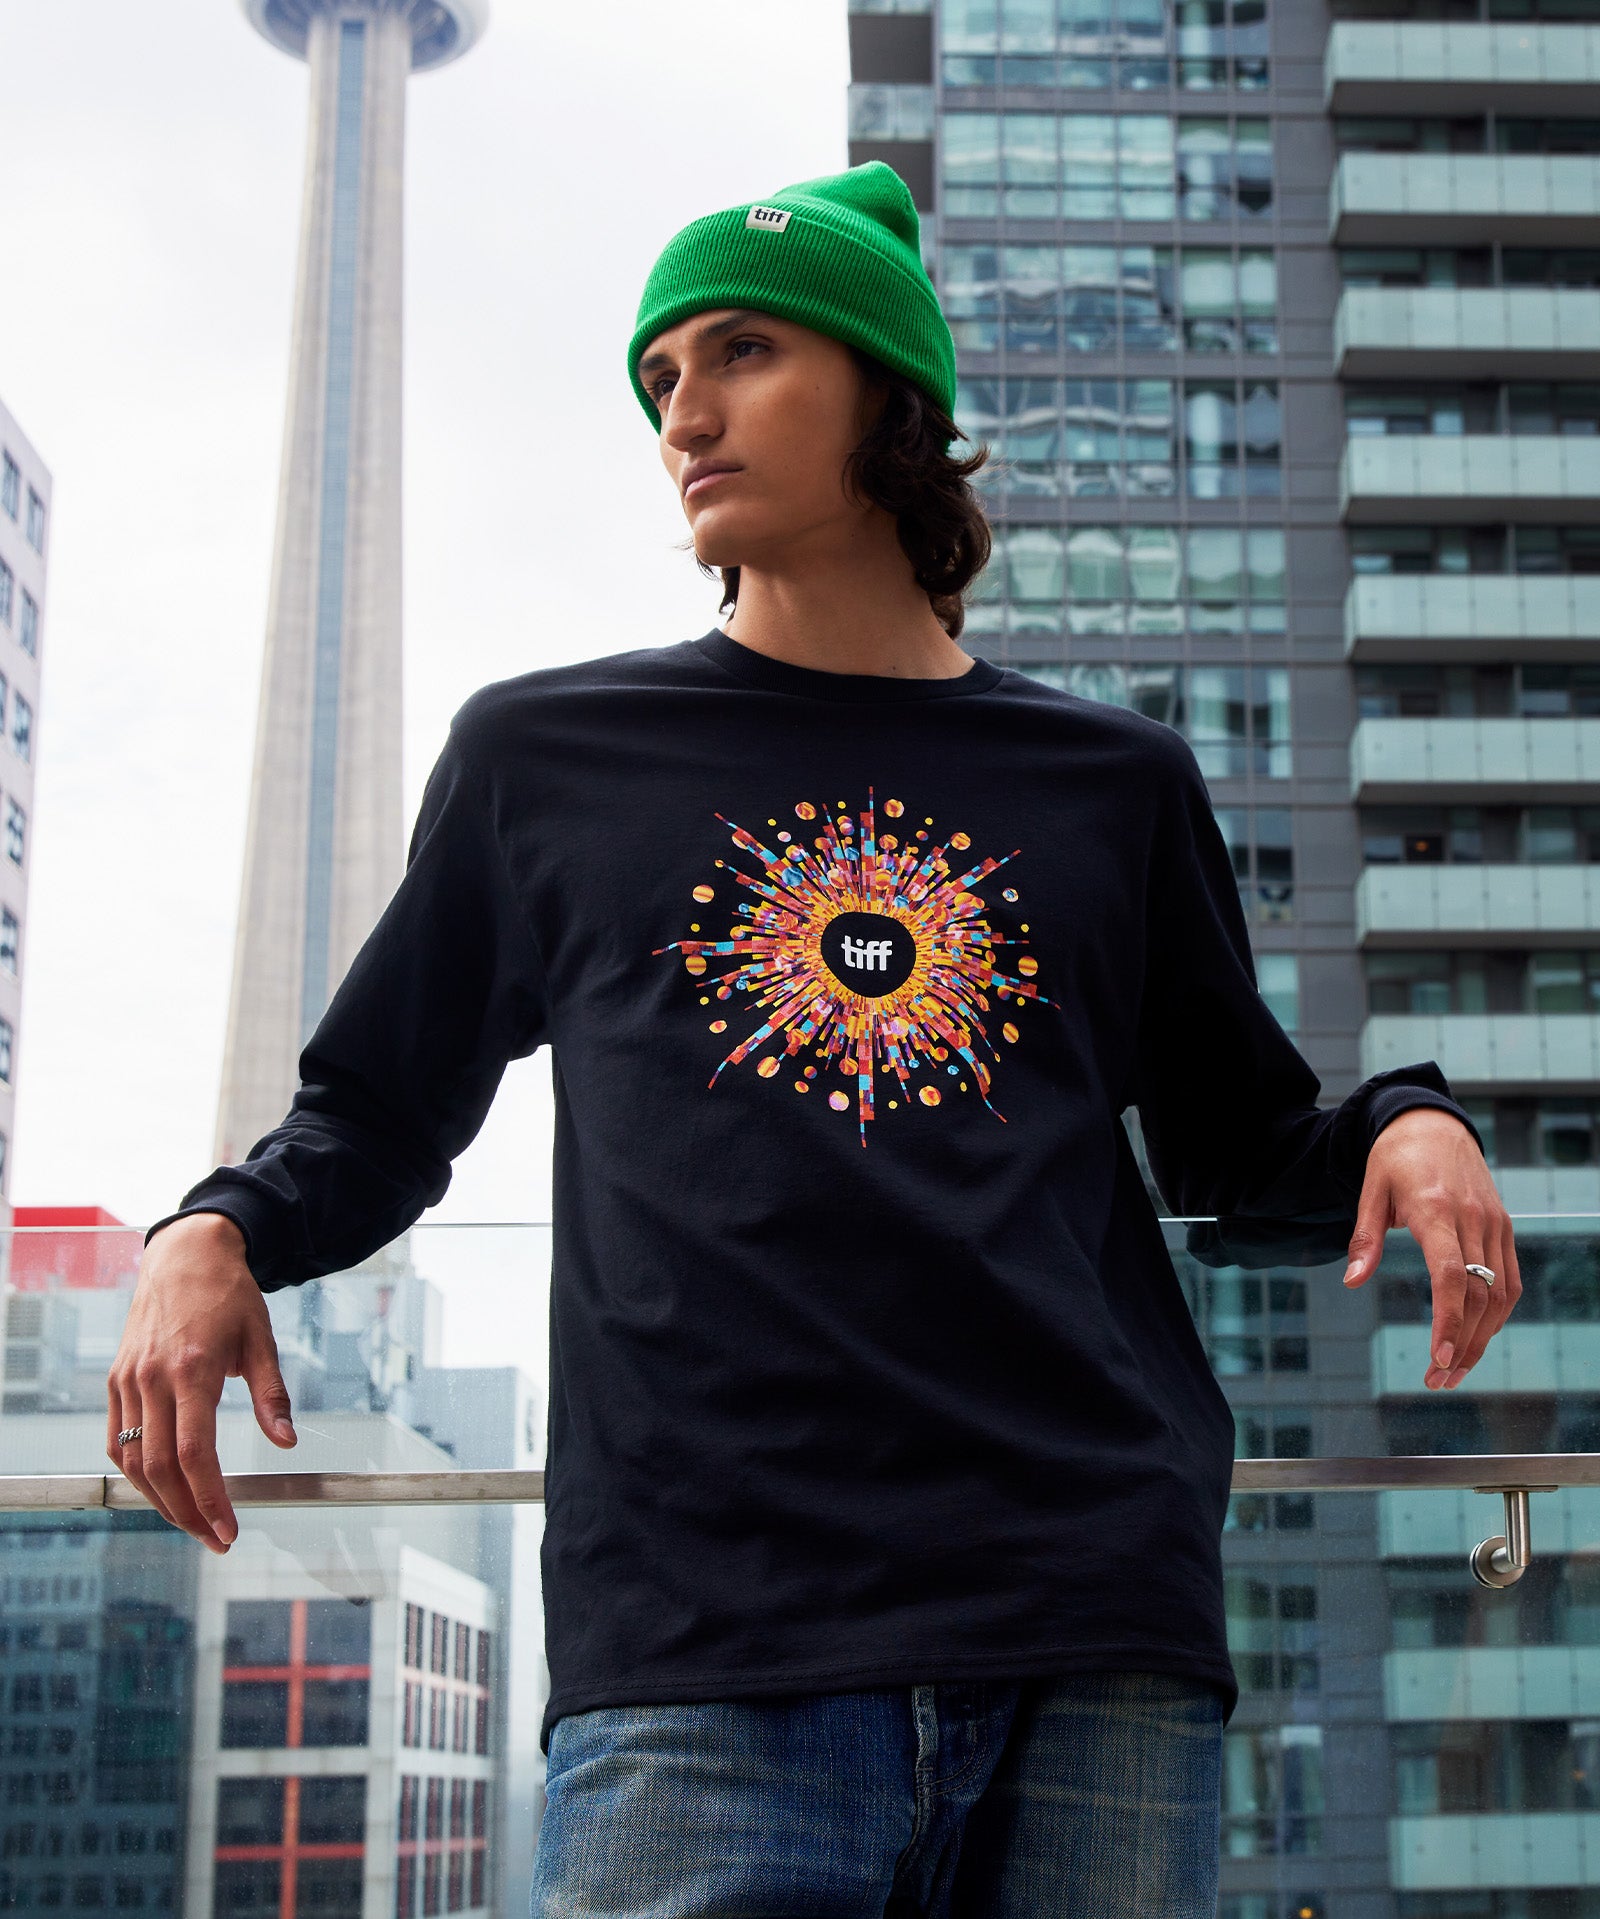 Man in TIFF 2023 festival long sleeve shirt and green toque